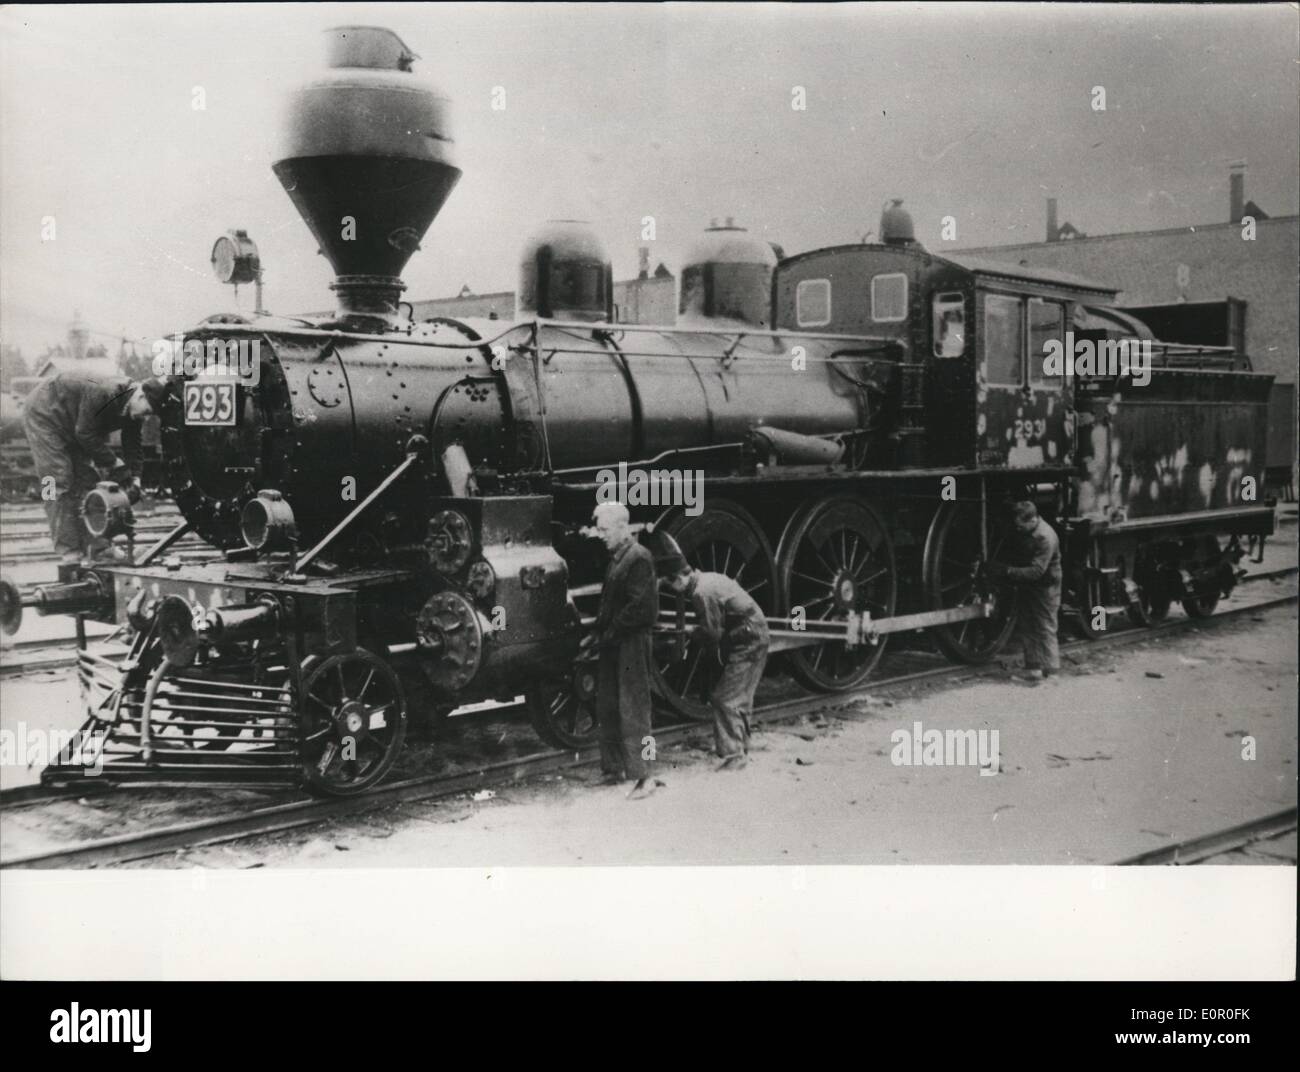 Jun. 06, 1957 - Historical locomotive-gift for Soviet Statesmen: A gift of historic worth will be rendered to Bulganin and Chrustschow when they will visit Finland from June 6th till 13th. That is the locomotive which brought Lenin in 1917 from the then Petersburg to Finland on his escape. Stock Photo